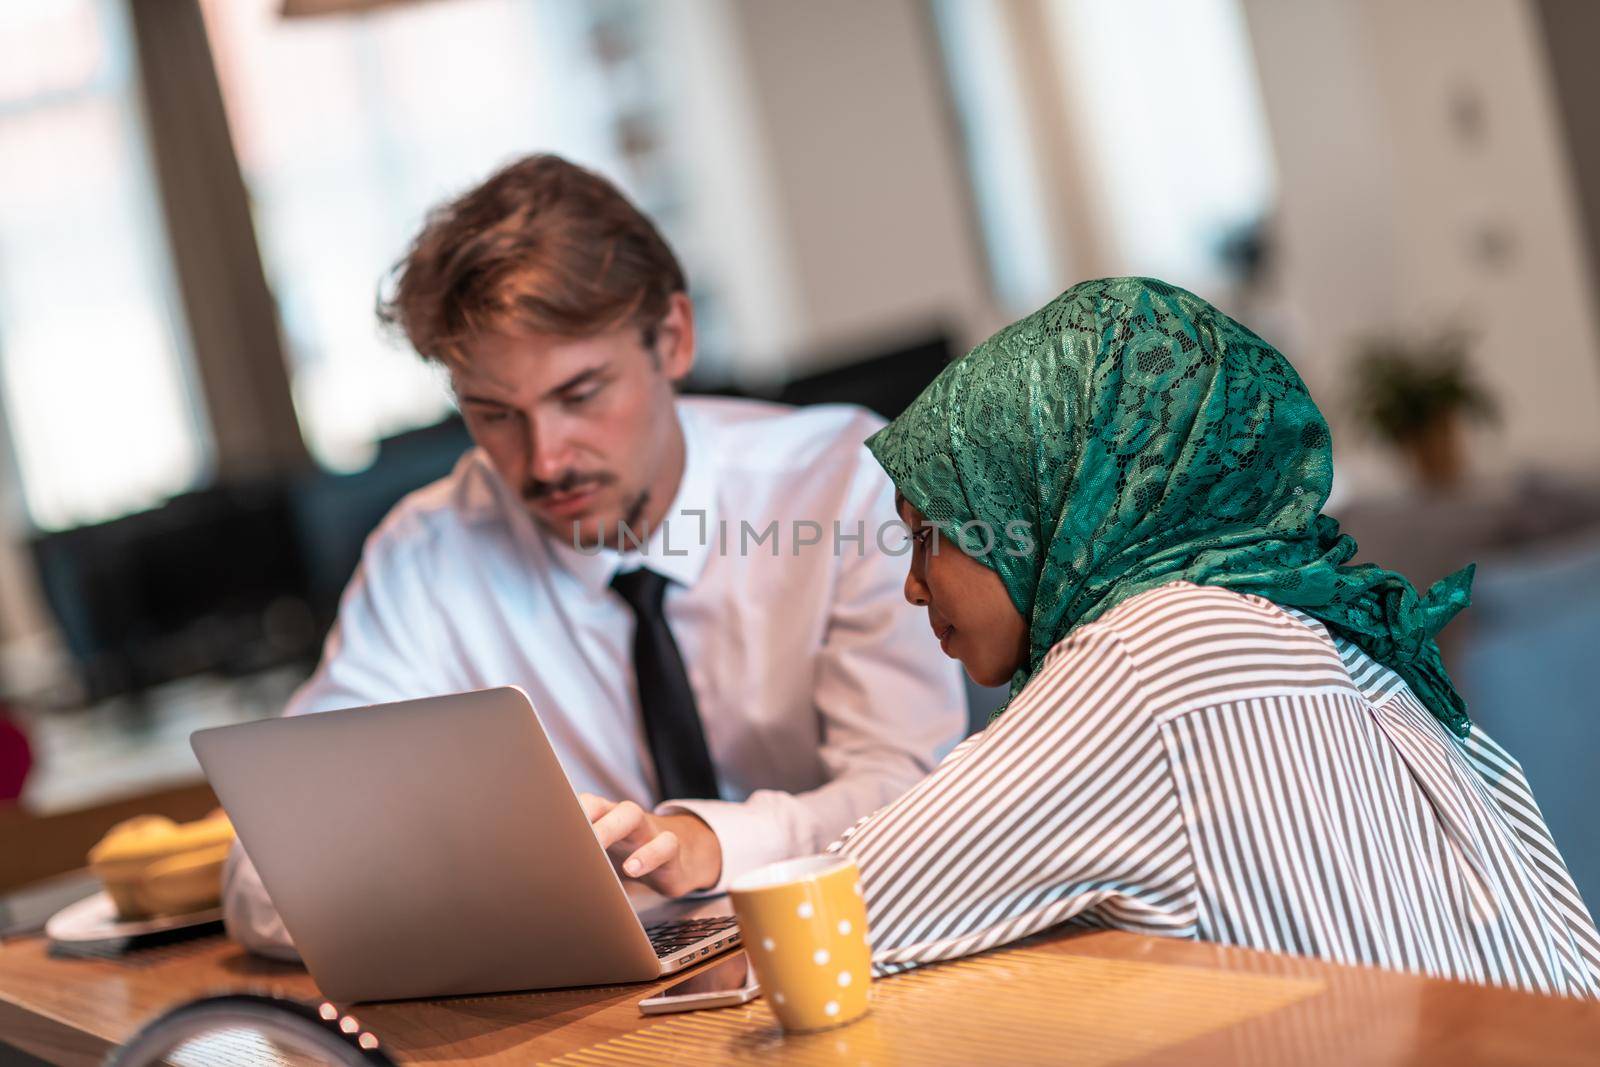 International multicultural business team.Man and muslim woman with hijab working together using smartphone and laptop coxation area at modern open plan startup officemputer in rela by dotshock